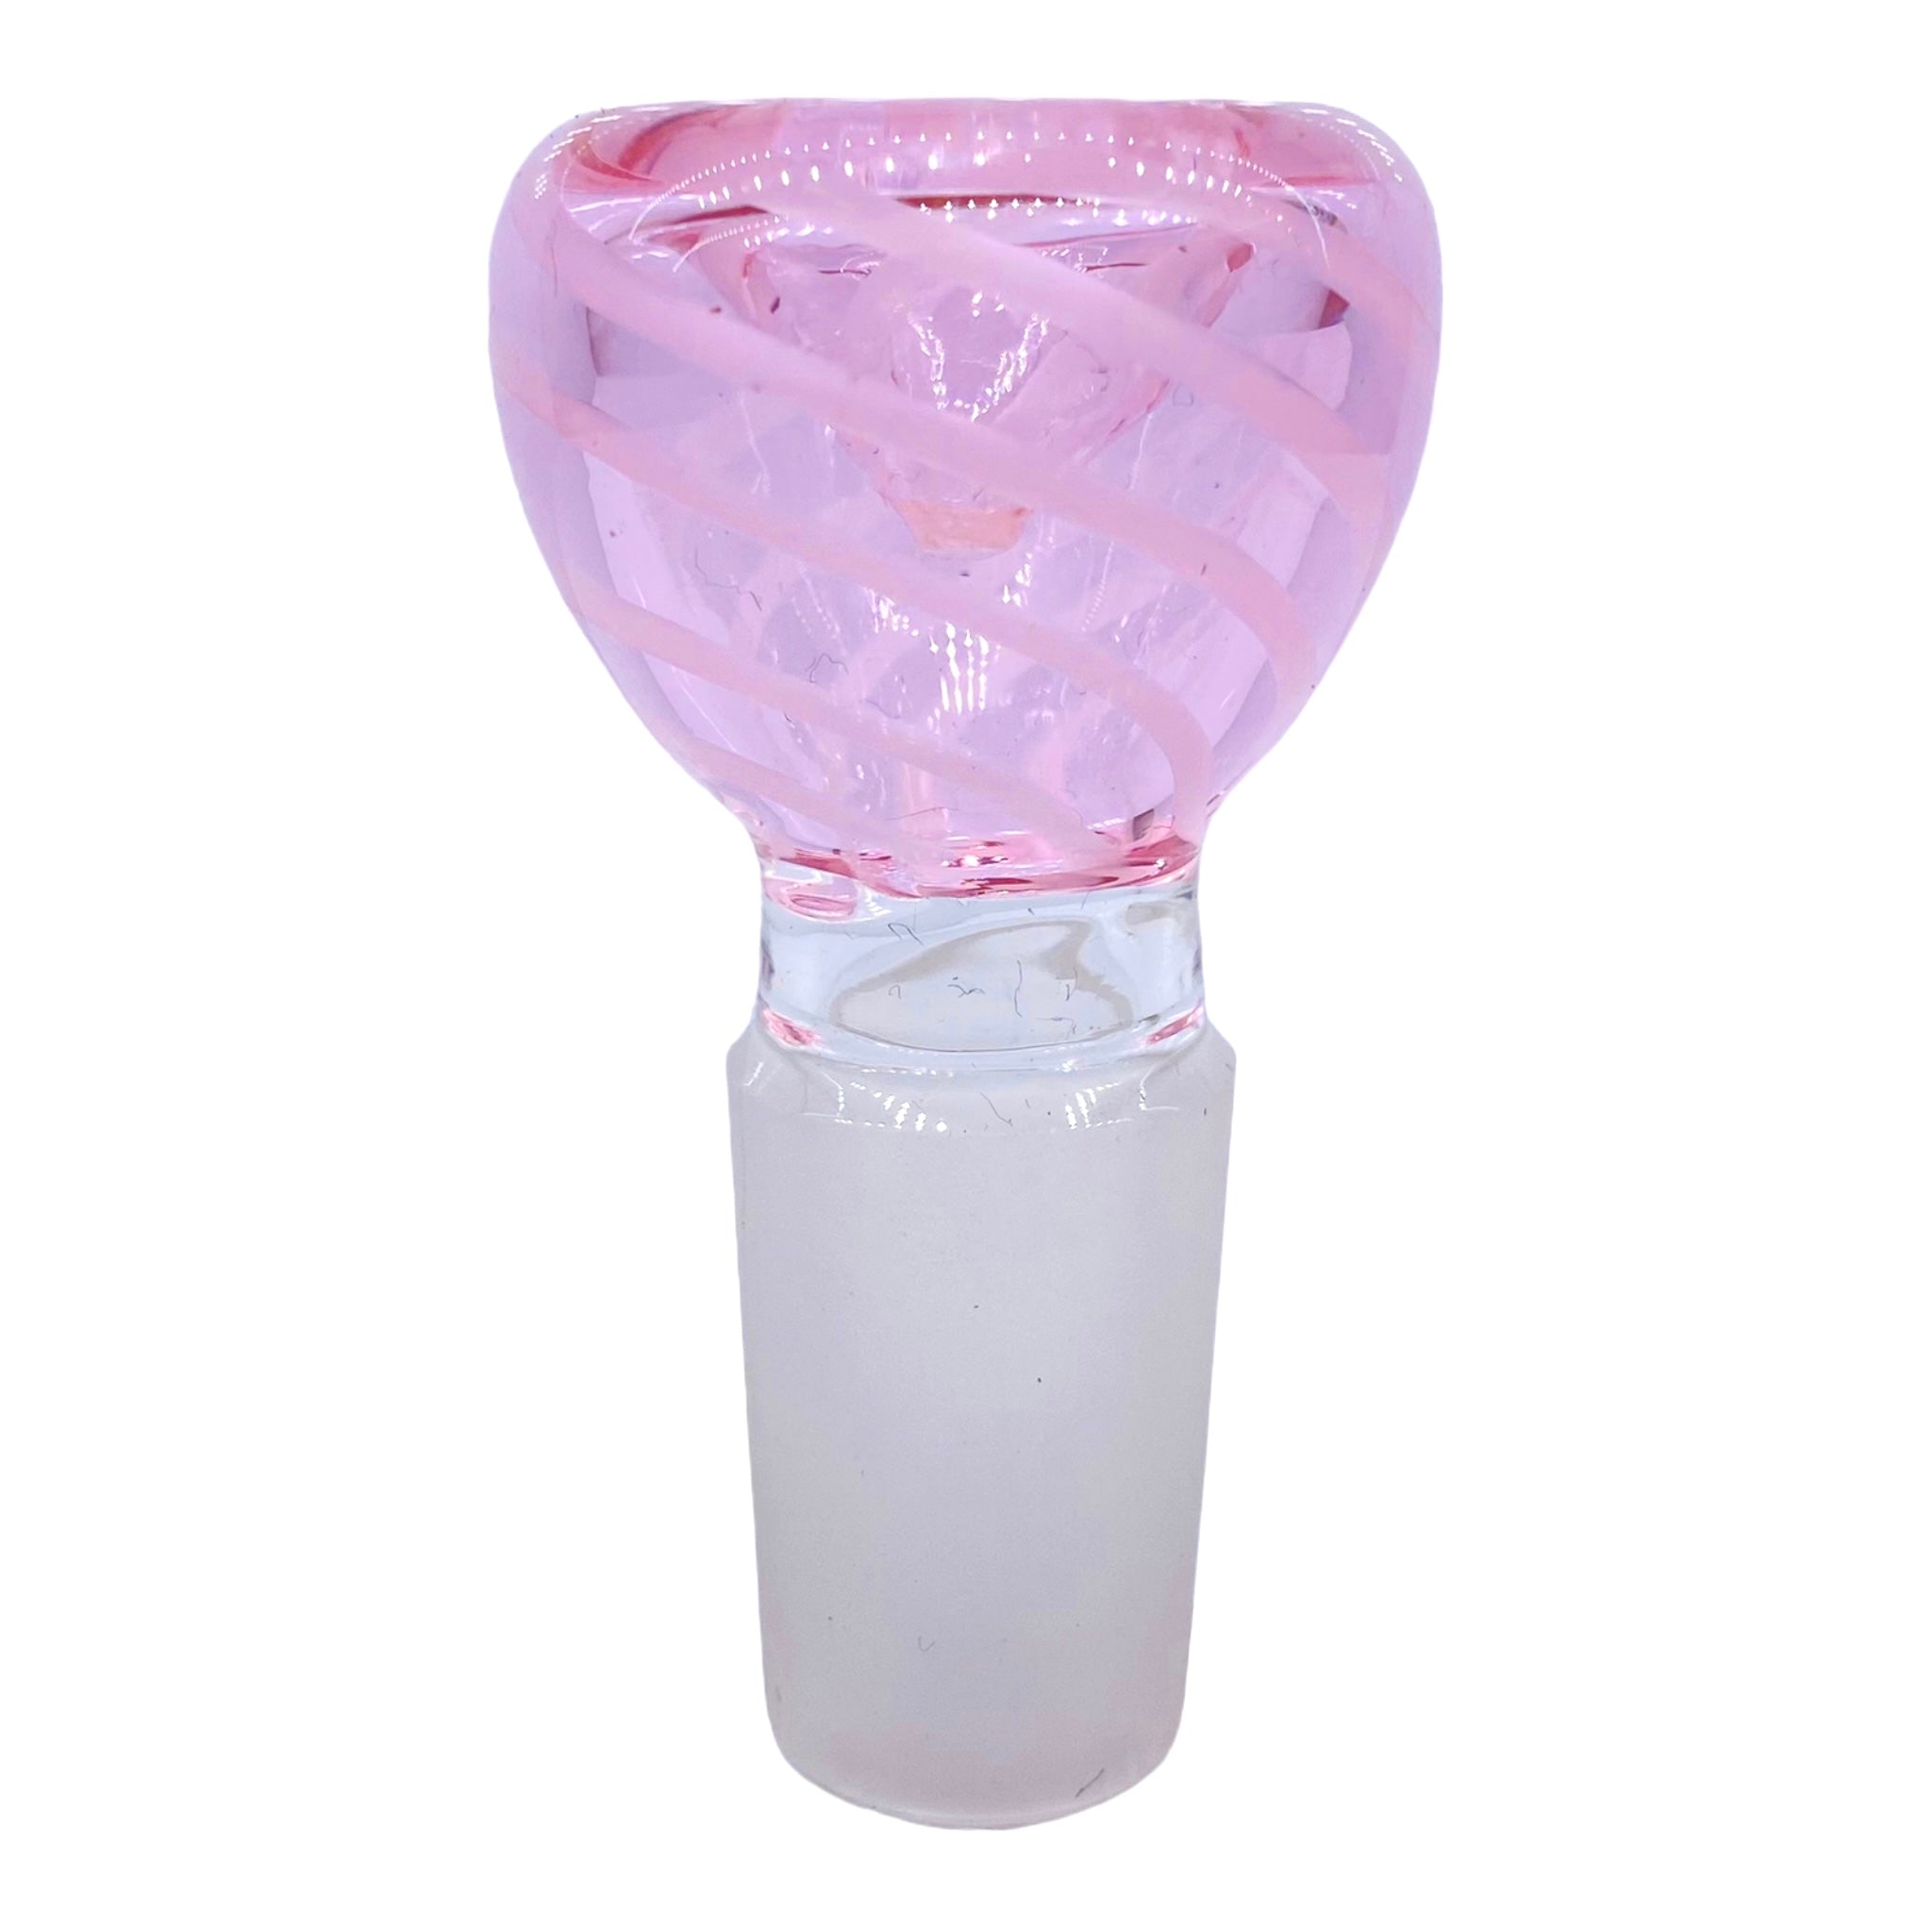 18mm Flower Bowl - Pink With White Twirl Basic Bubble Bong Bowl Piece